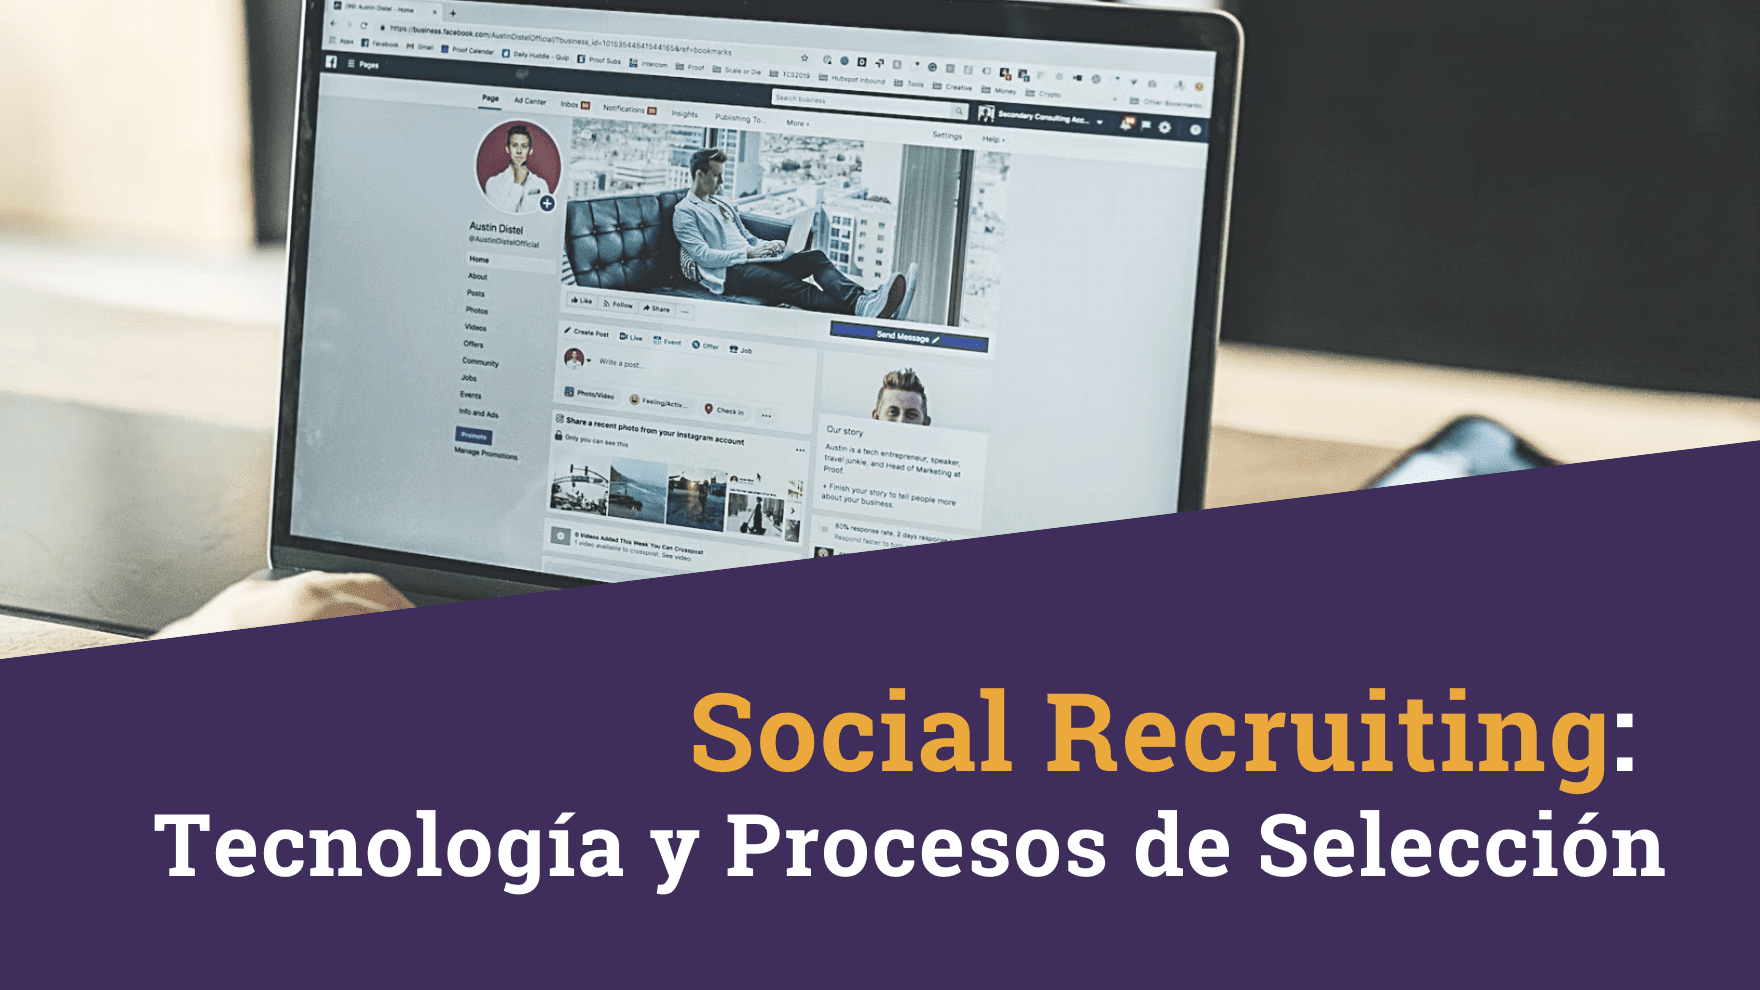 Social Recruiting: Technology and Selection Processes